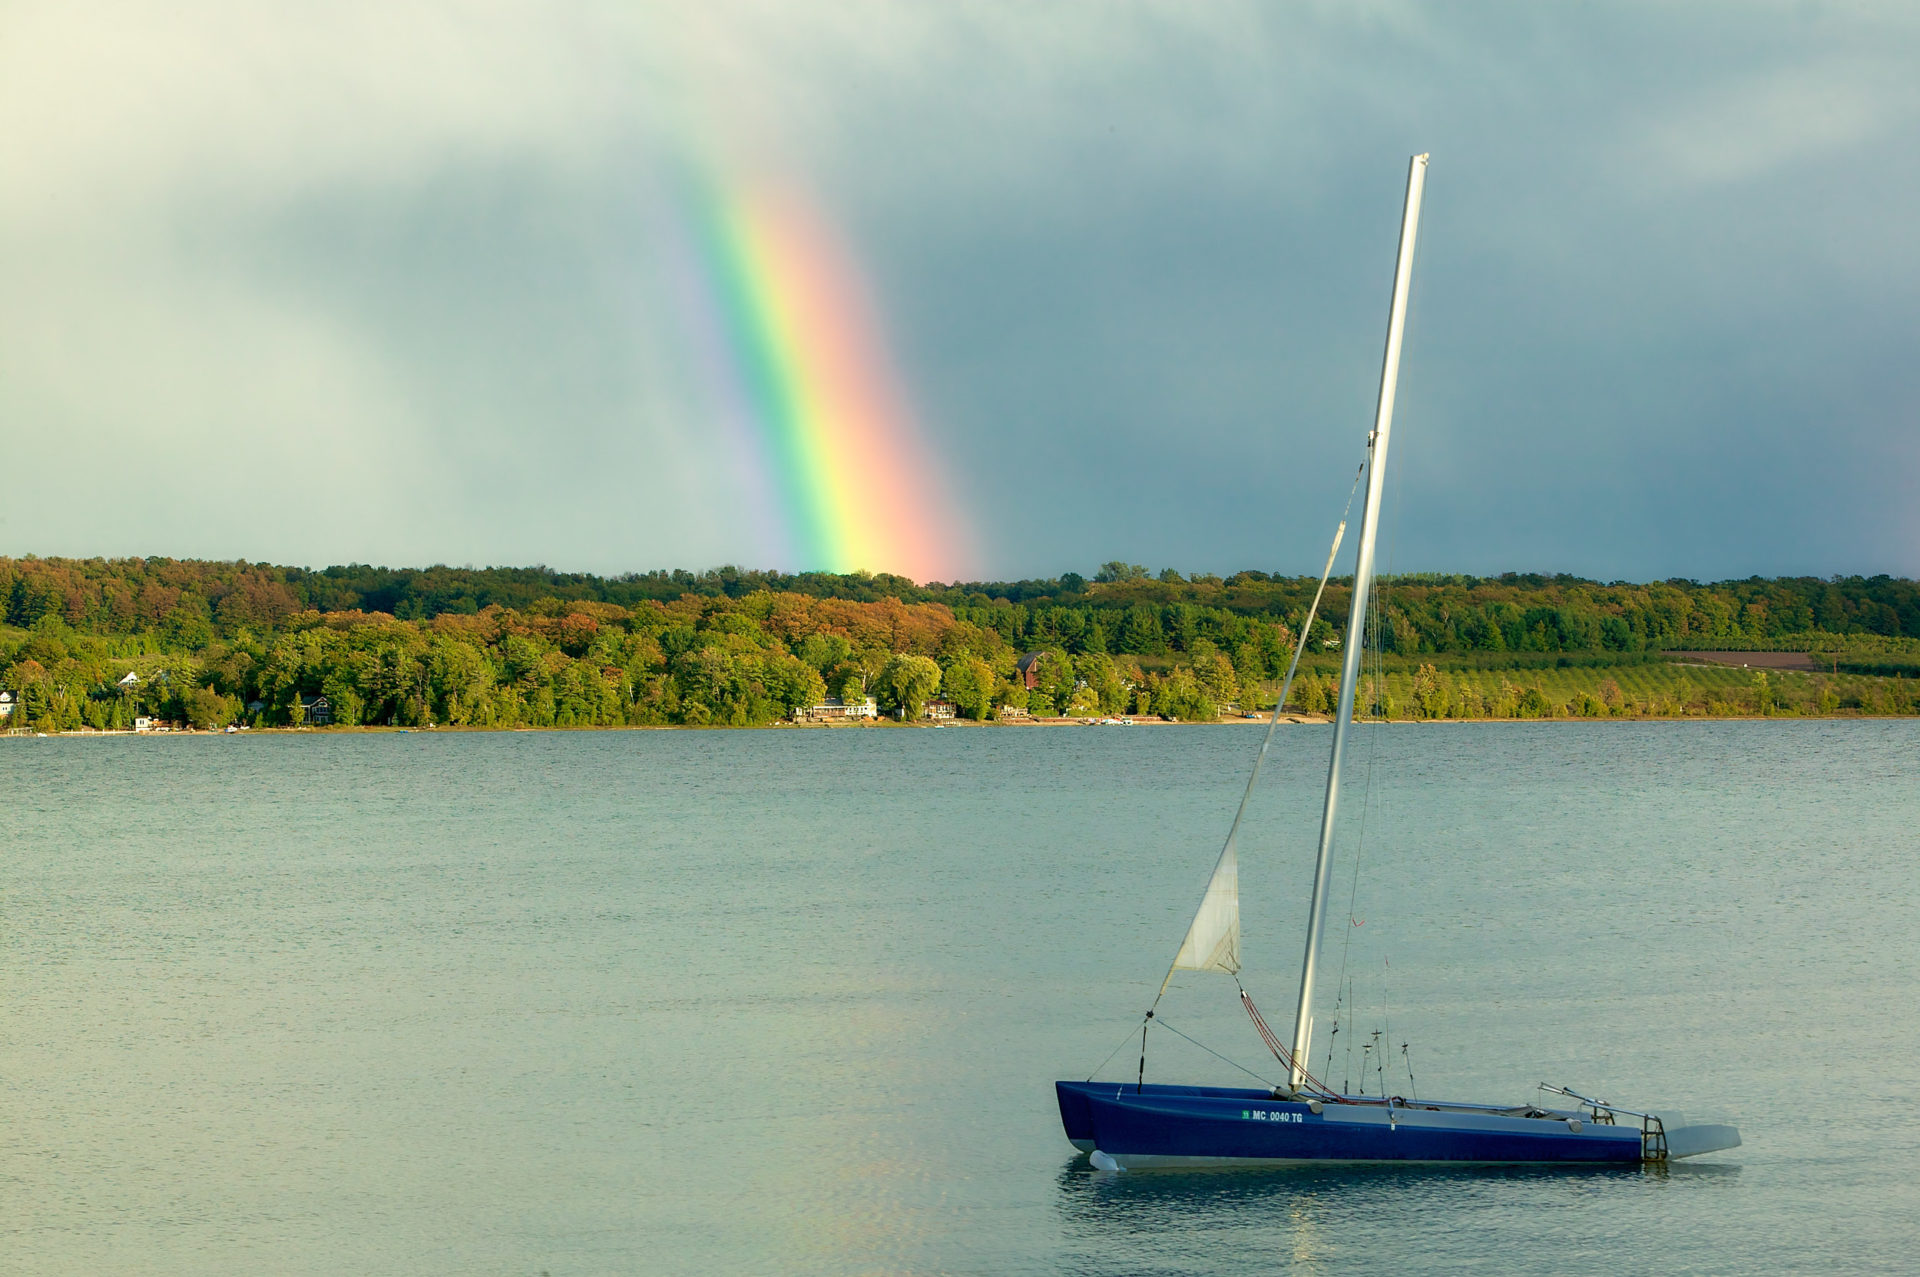 rainbow leading into hillside over lake with Hobie cat anchored in foreground in Suttons Bay Michigan